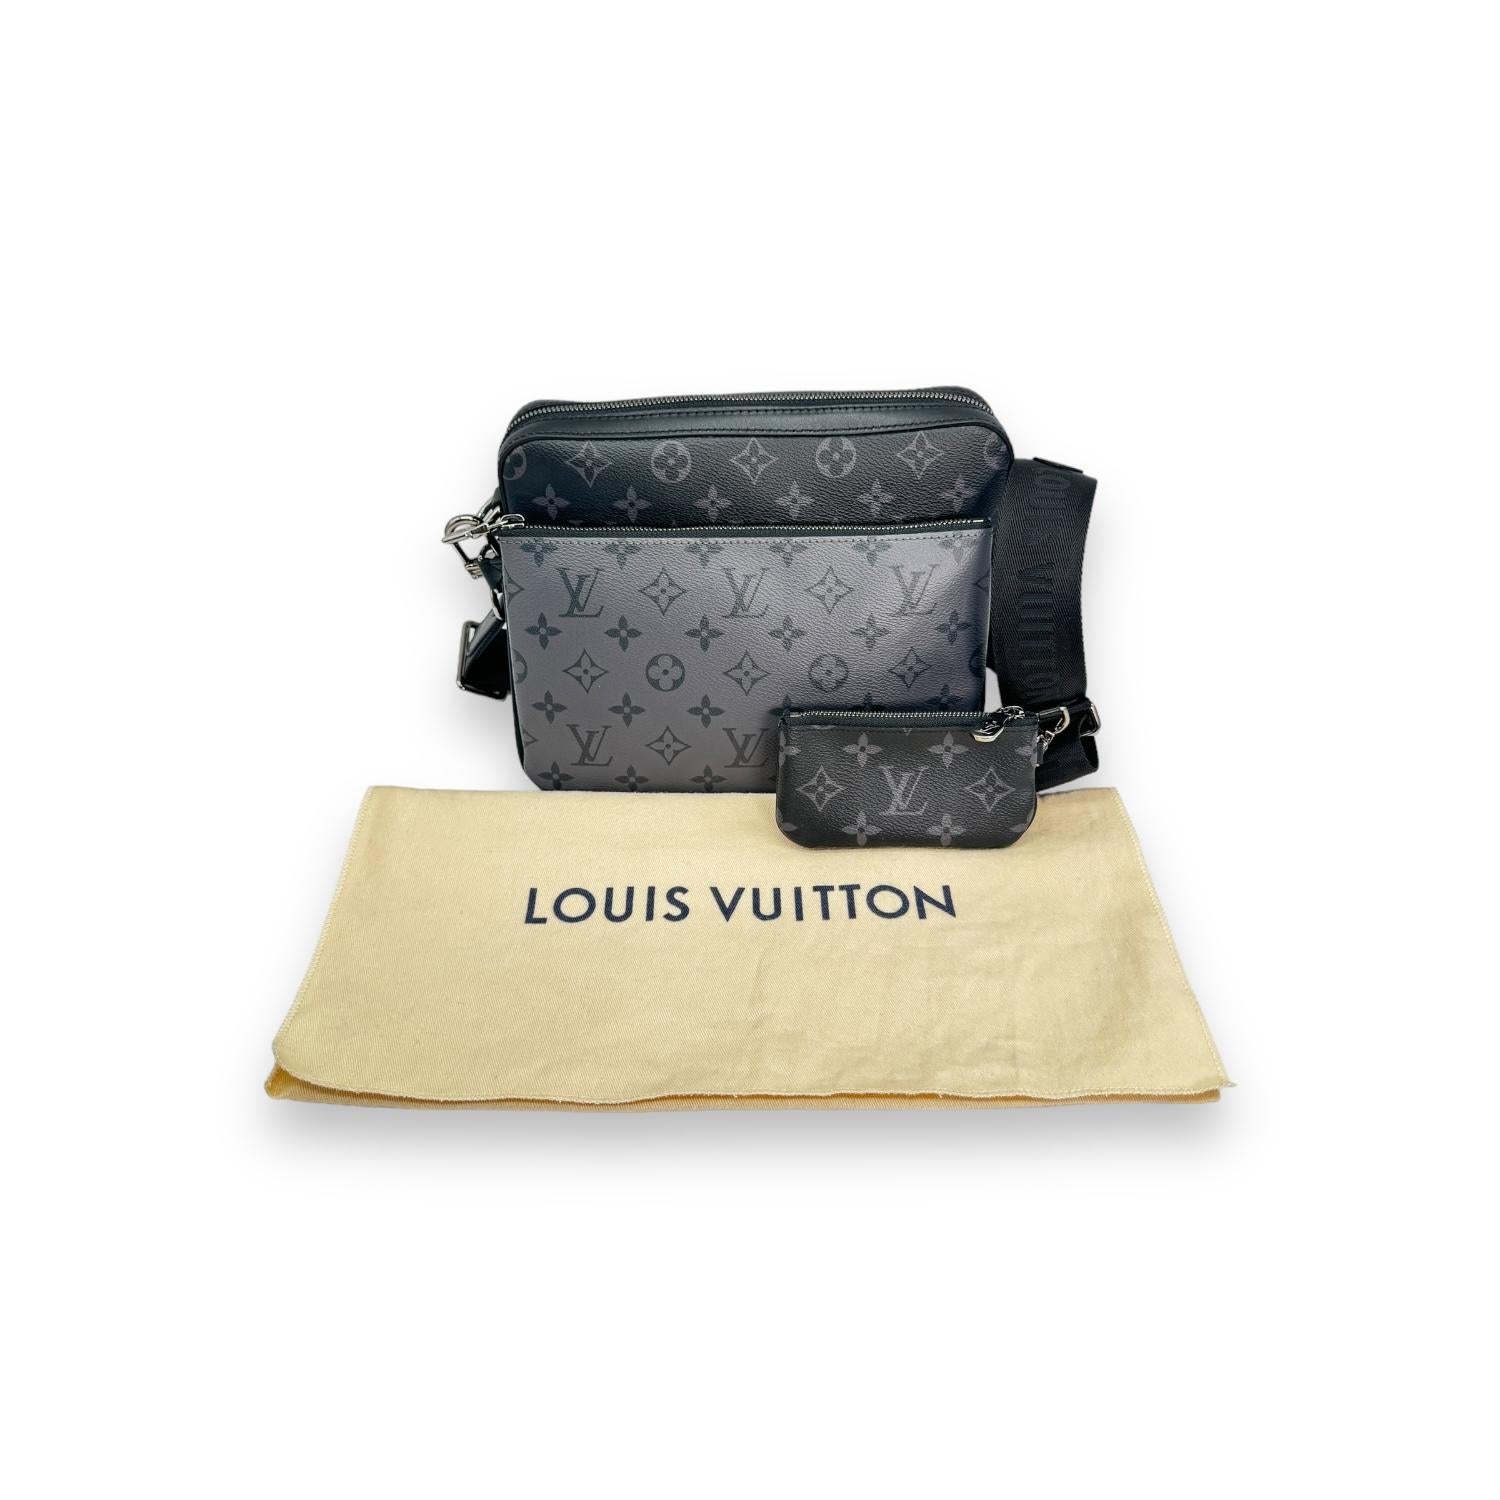 The Louis Vuitton Reverse Monogram Eclipse Trio Messenger Bag is a designer piece crafted in France with monogram eclipse and reverse coated canvas. With a microchip for authenticity, this bag also features cow-hide leather trim and a spacious